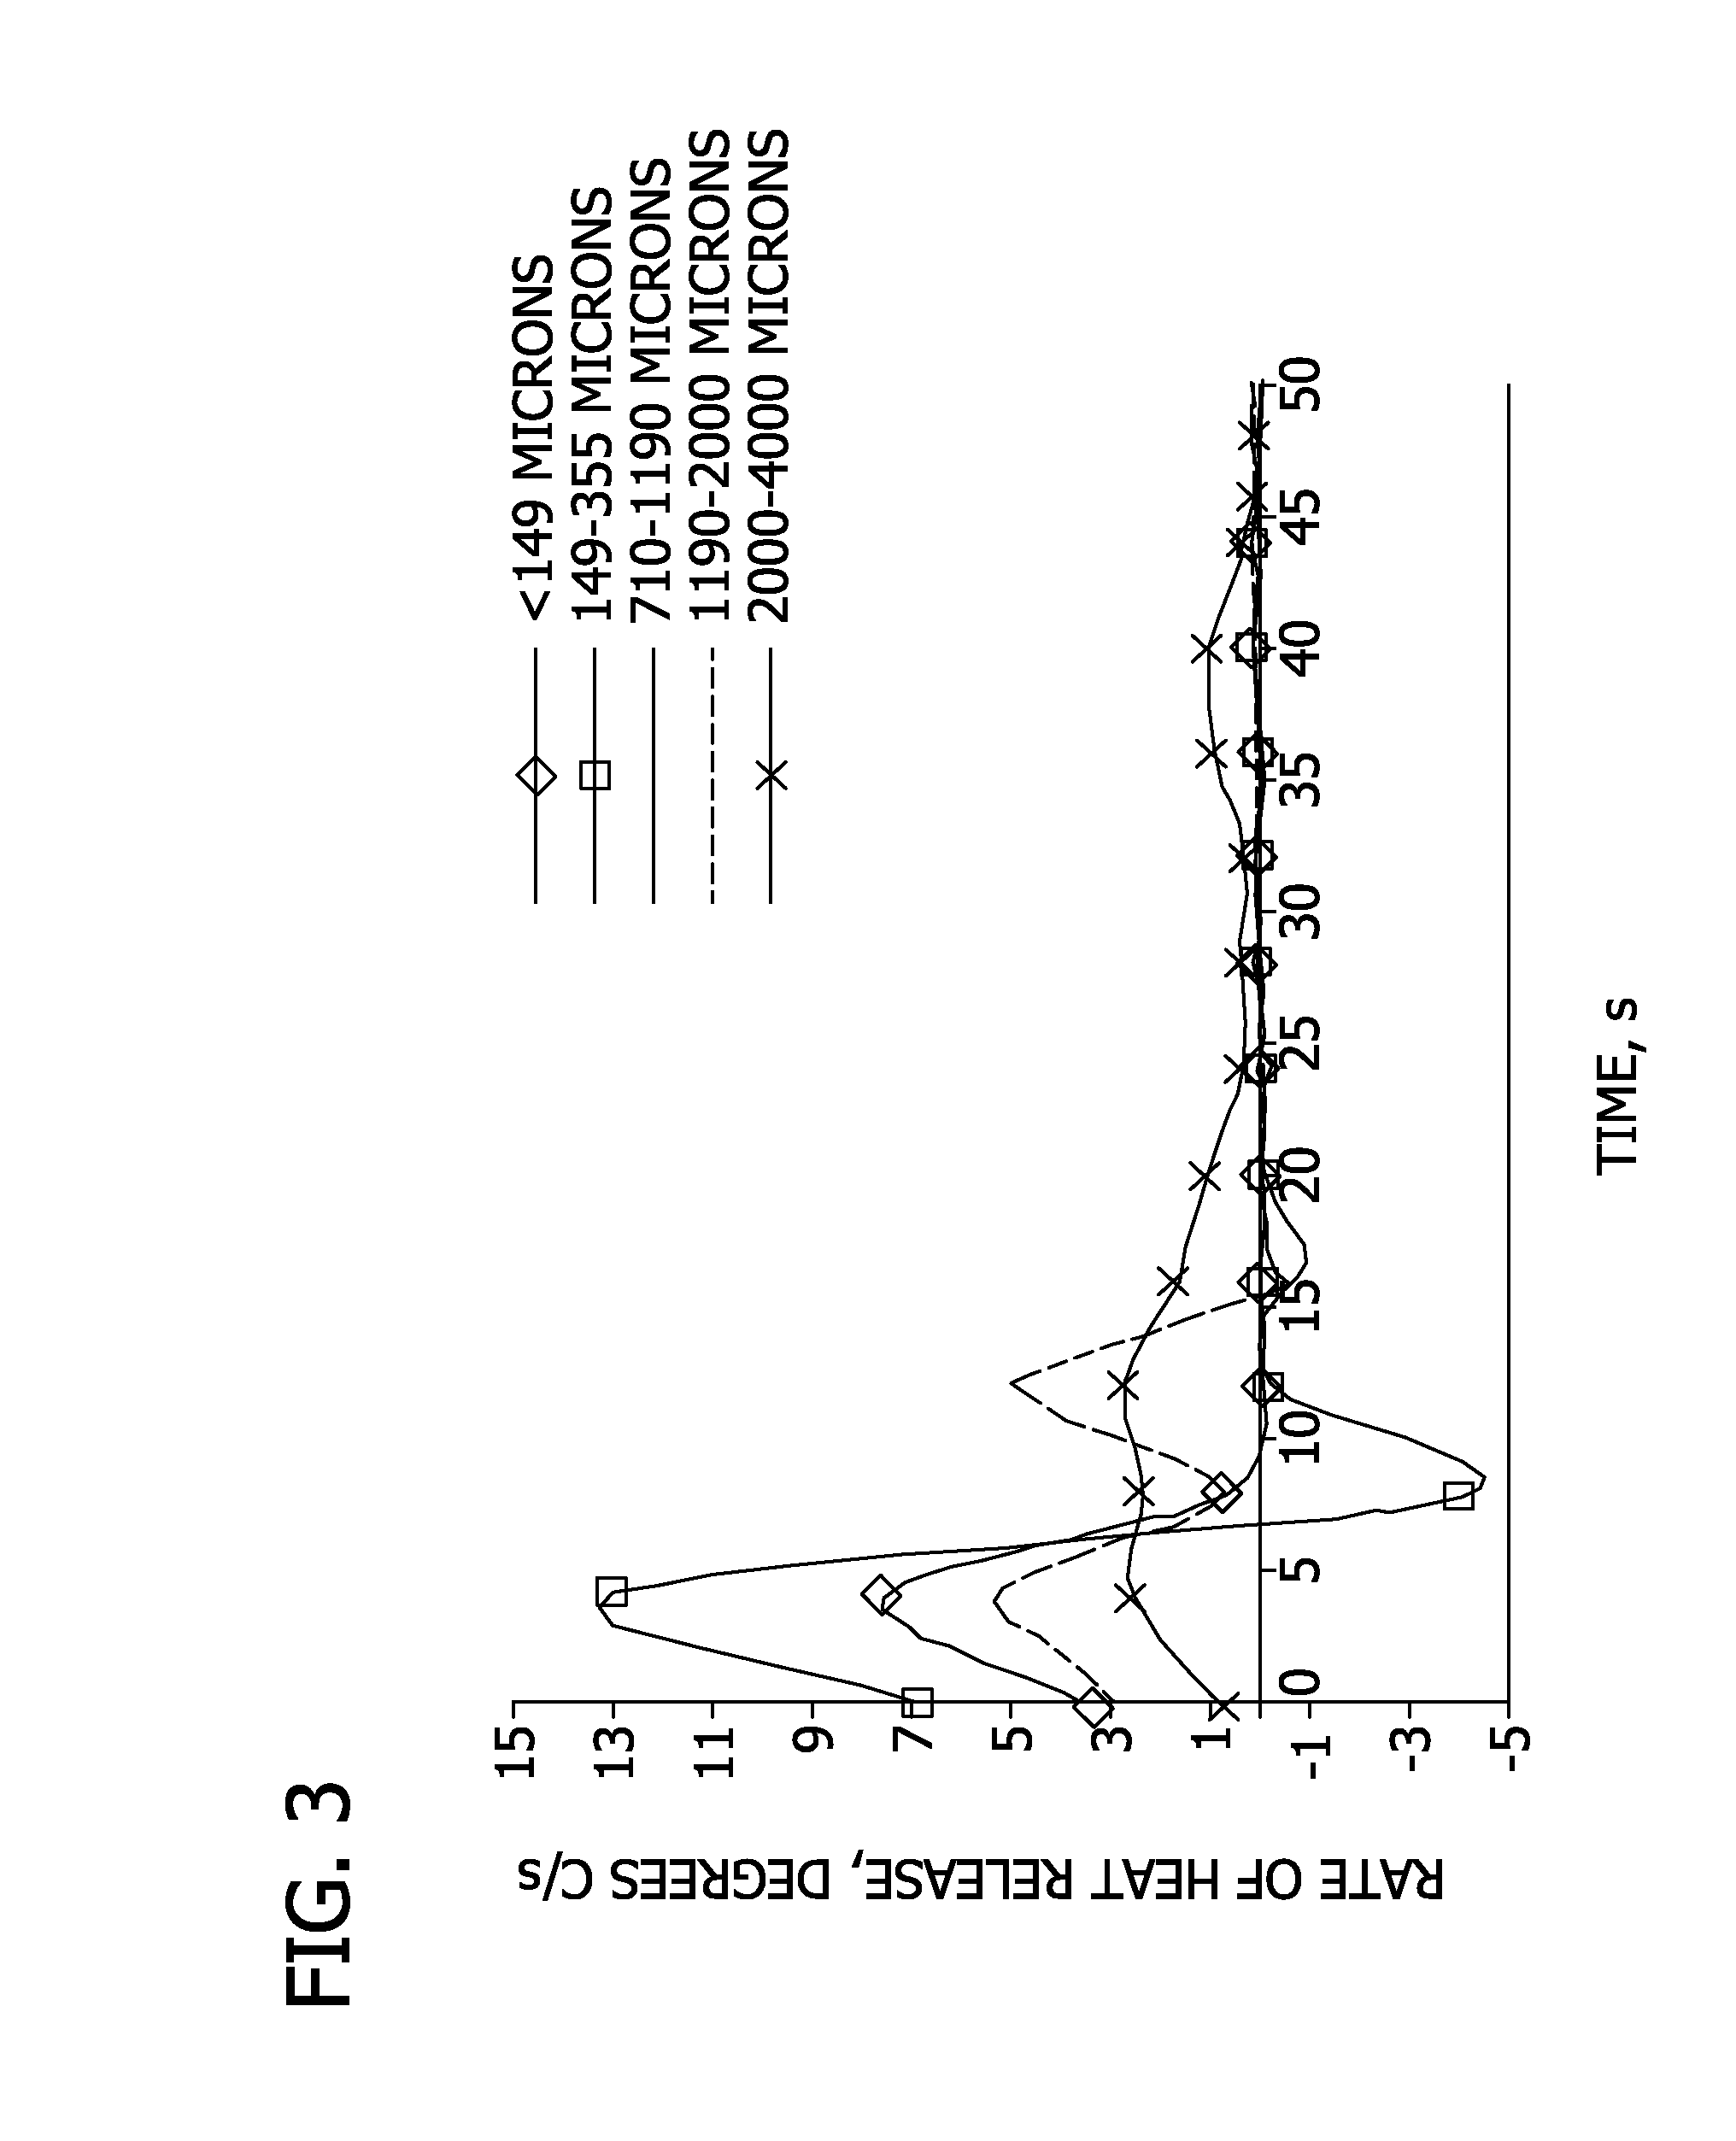 Method of Manufacturing Self-Warming Products